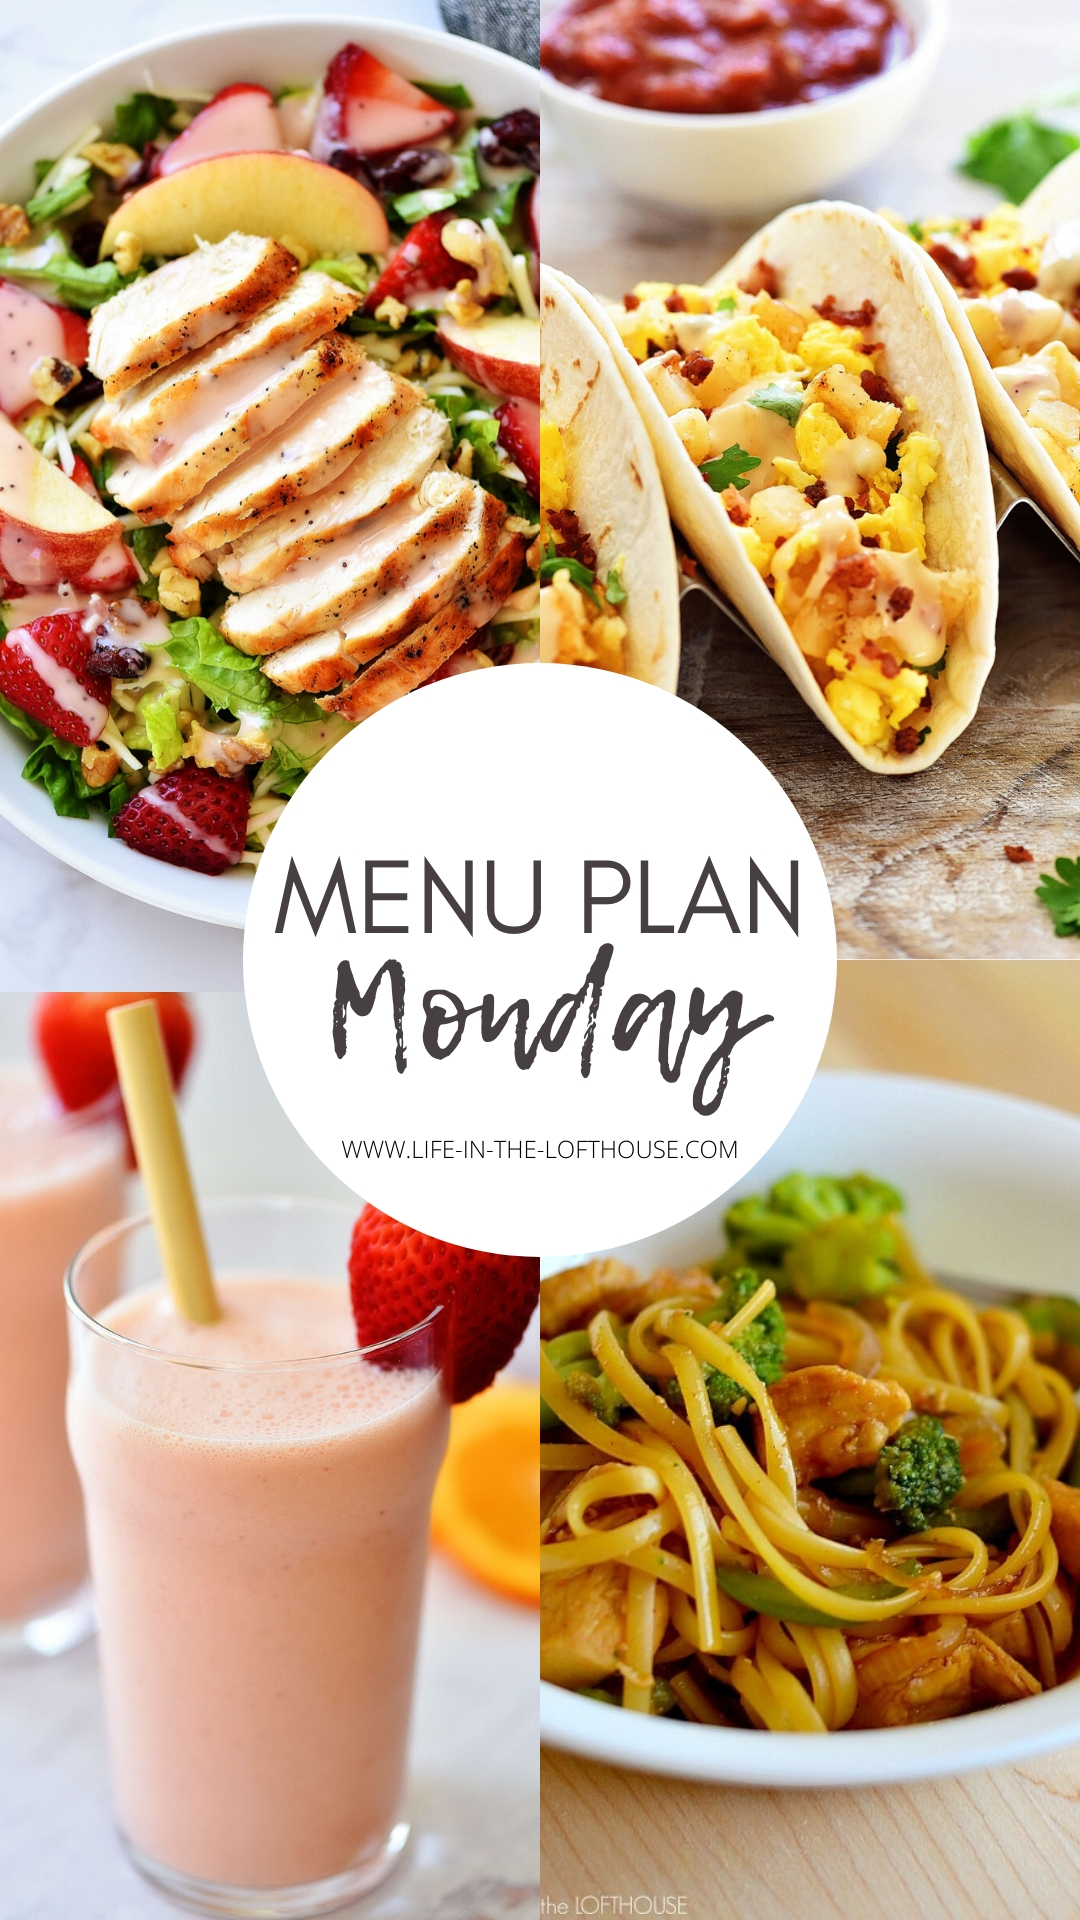 Menu Plan Monday is a weekly menu with delicious dinner recipes. All of the recipes are easy to follow and great for busy weeknights!